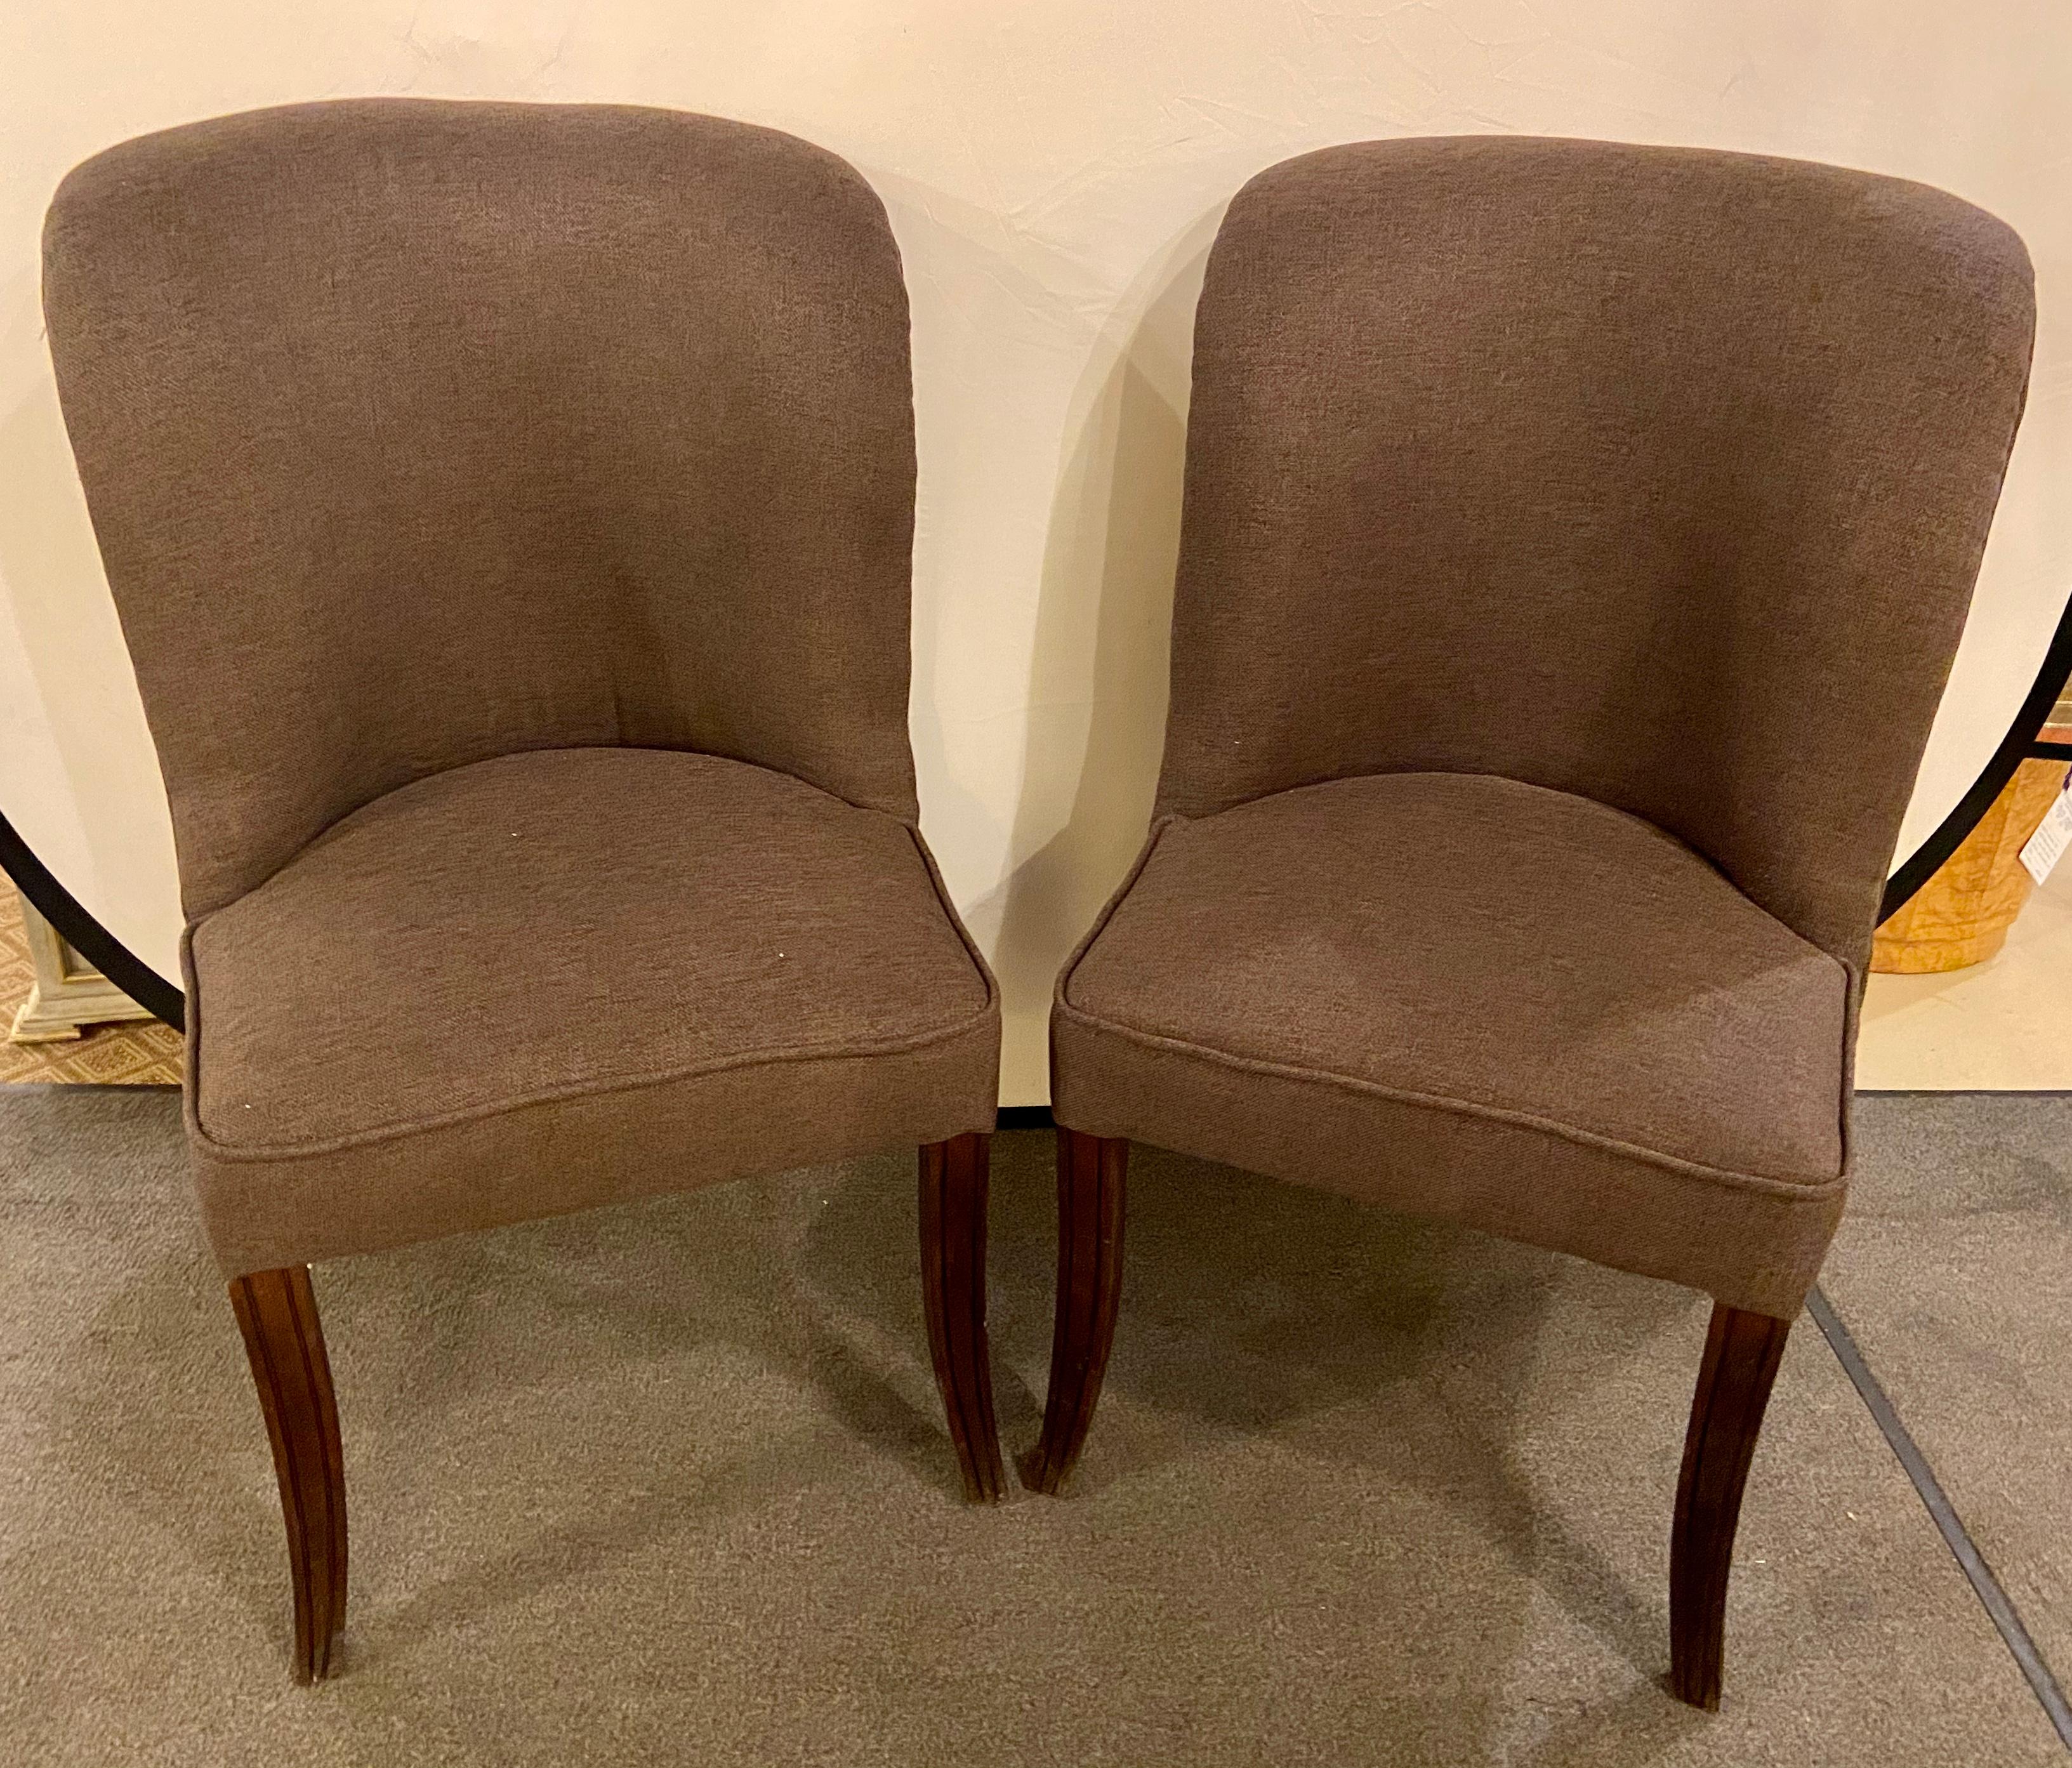 Karl Springer Style MCM side Gray Chairs, a Pair
chic and very comfortable, the pair of Mid-Century Modern style chairs feature a fine new upholstery in gray. The legs are made of wood and hand carved.

Dimensions: H 38 in. x W 23 in. x D 23 in. x